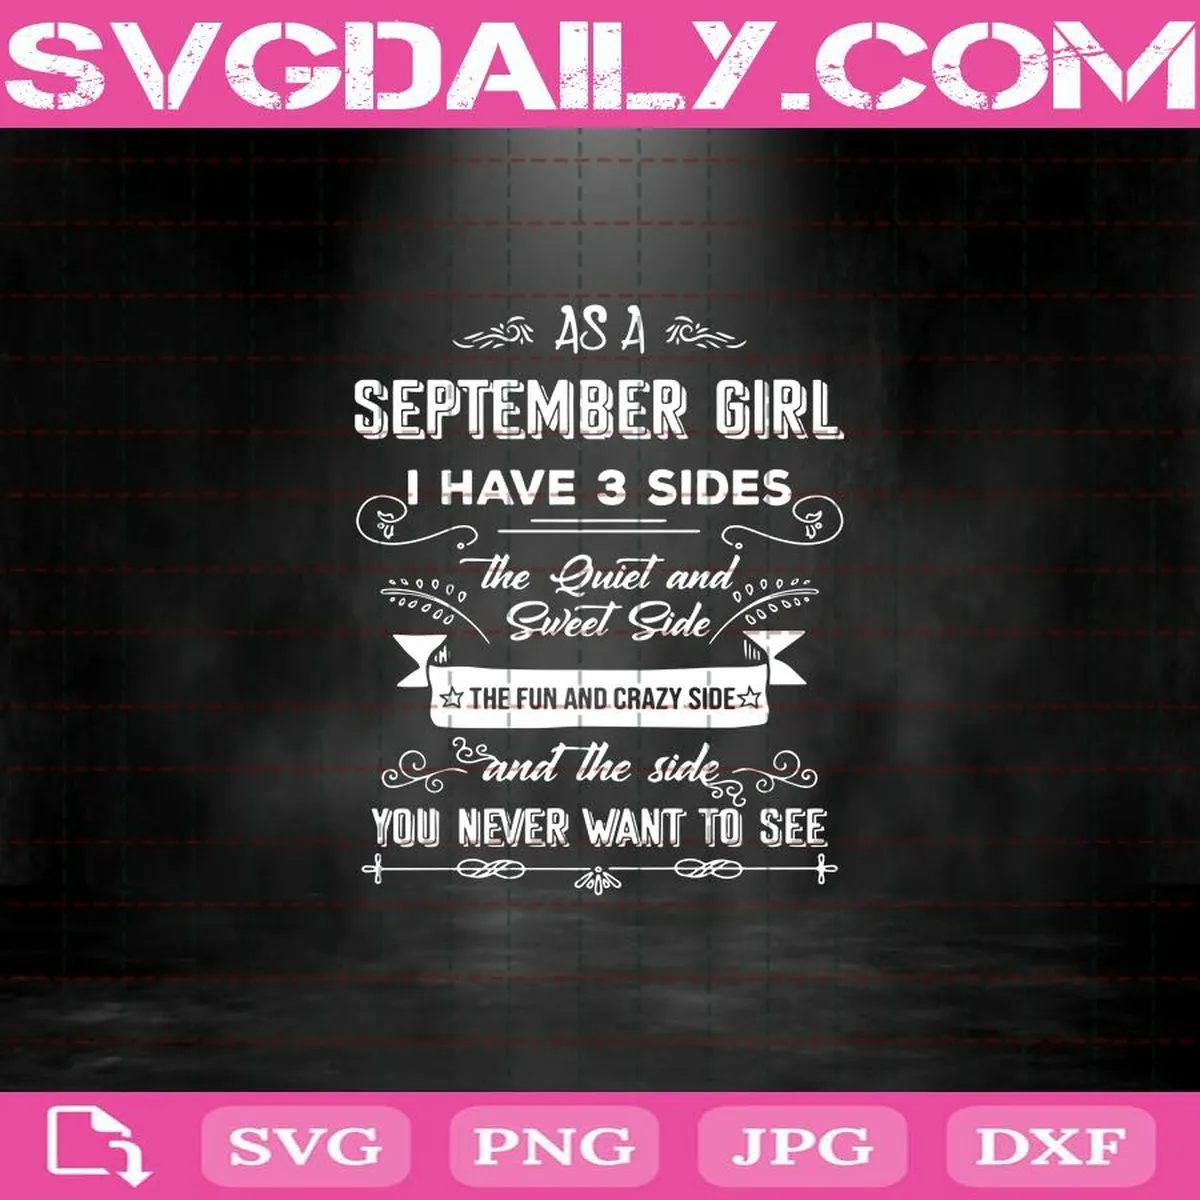 As A September Girl I Have 3 Sides The Quiet Side The Fun Side And The Side You Never Want To See Svg, September Girl Svg, Birthday Svg